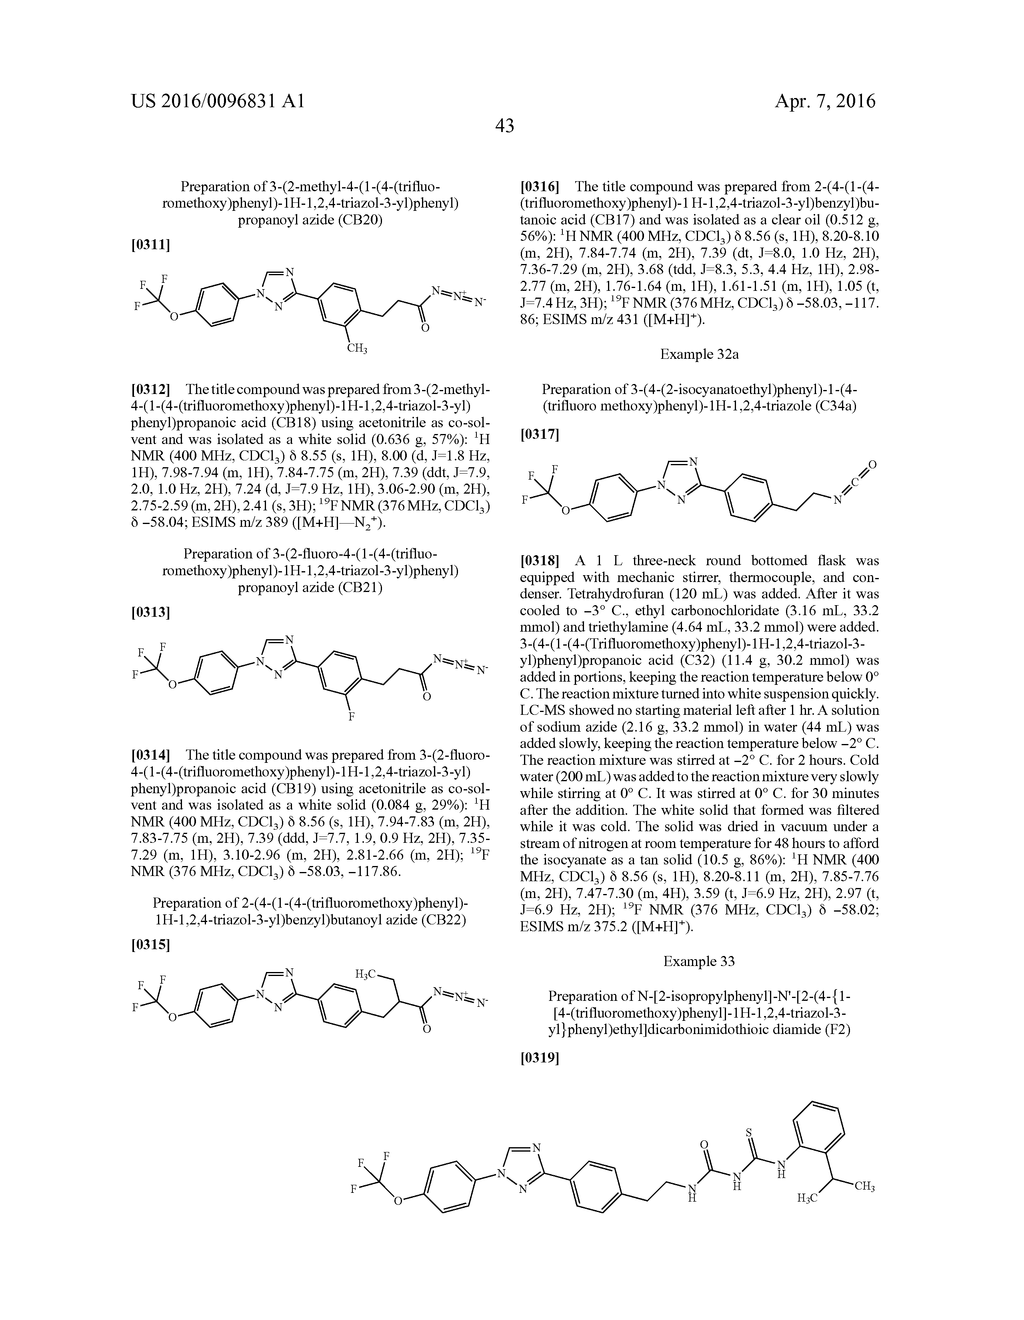 MOLECULES HAVING CERTAIN PESTICIDAL UTILITIES, AND INTERMEDIATES,     COMPOSITIONS, AND PROCESSES RELATED THERETO - diagram, schematic, and image 44